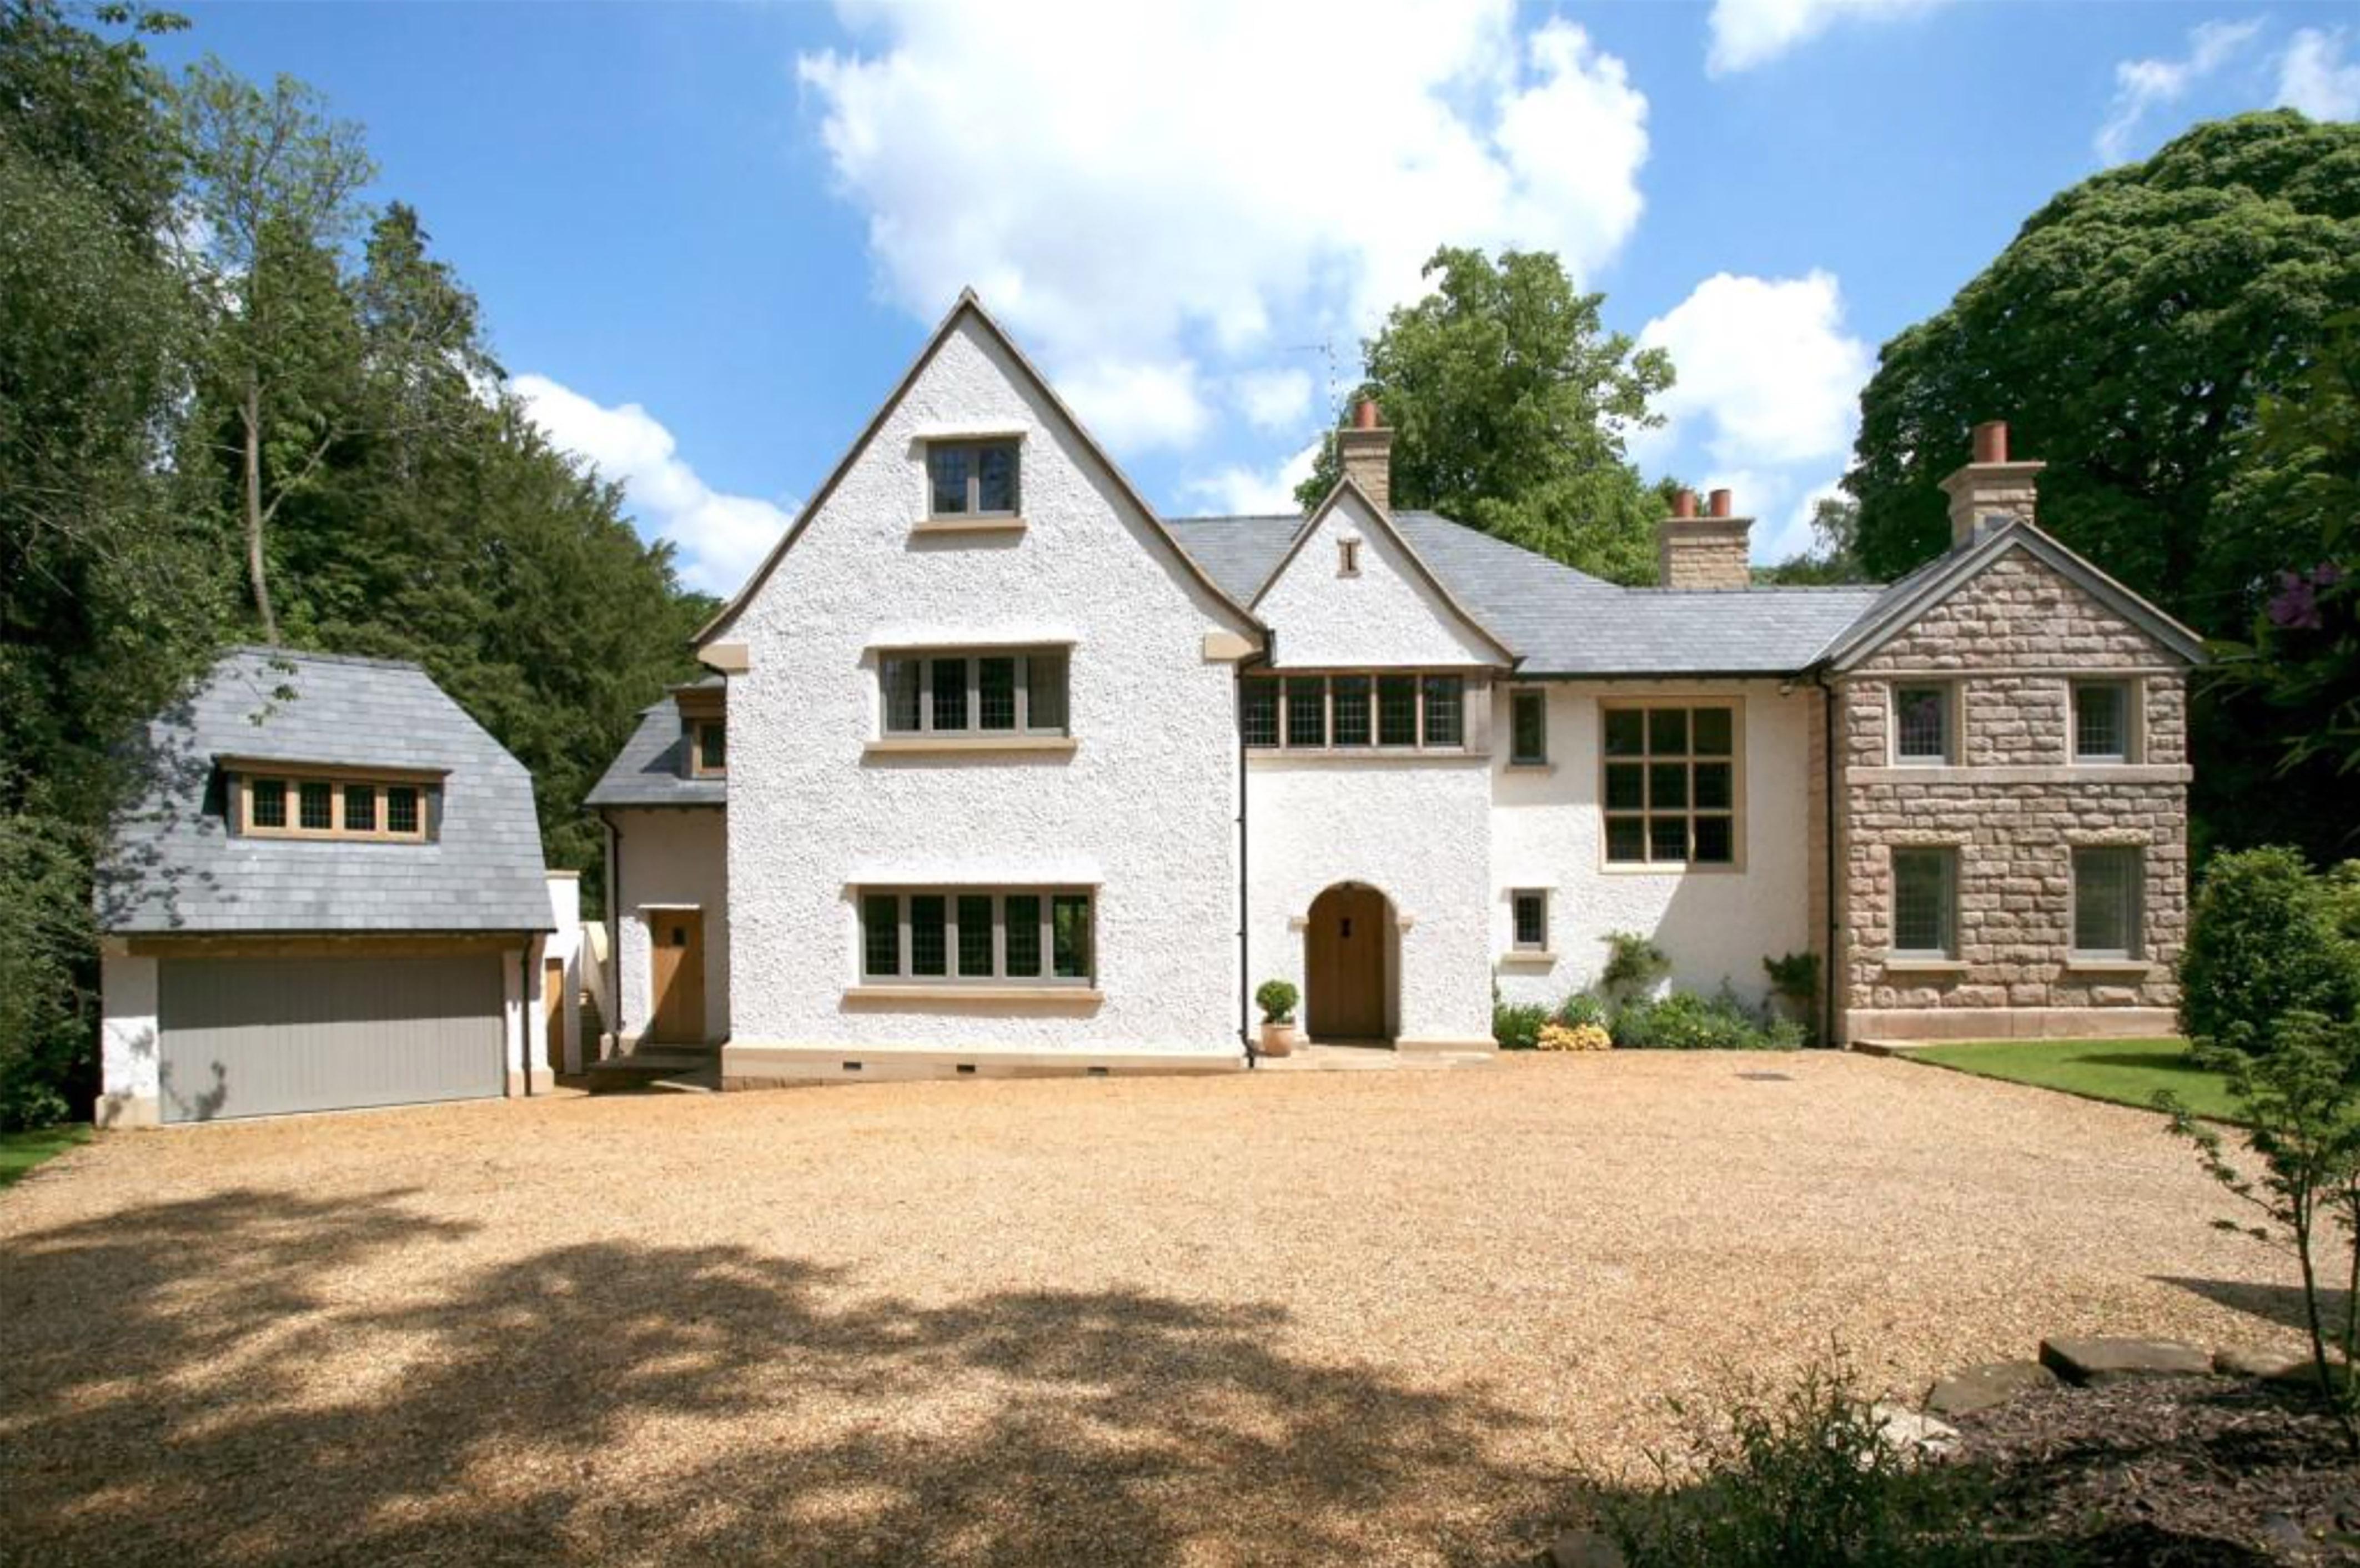  Patrick Vieira's Cheshire mansion has gone on sale for £2.2million